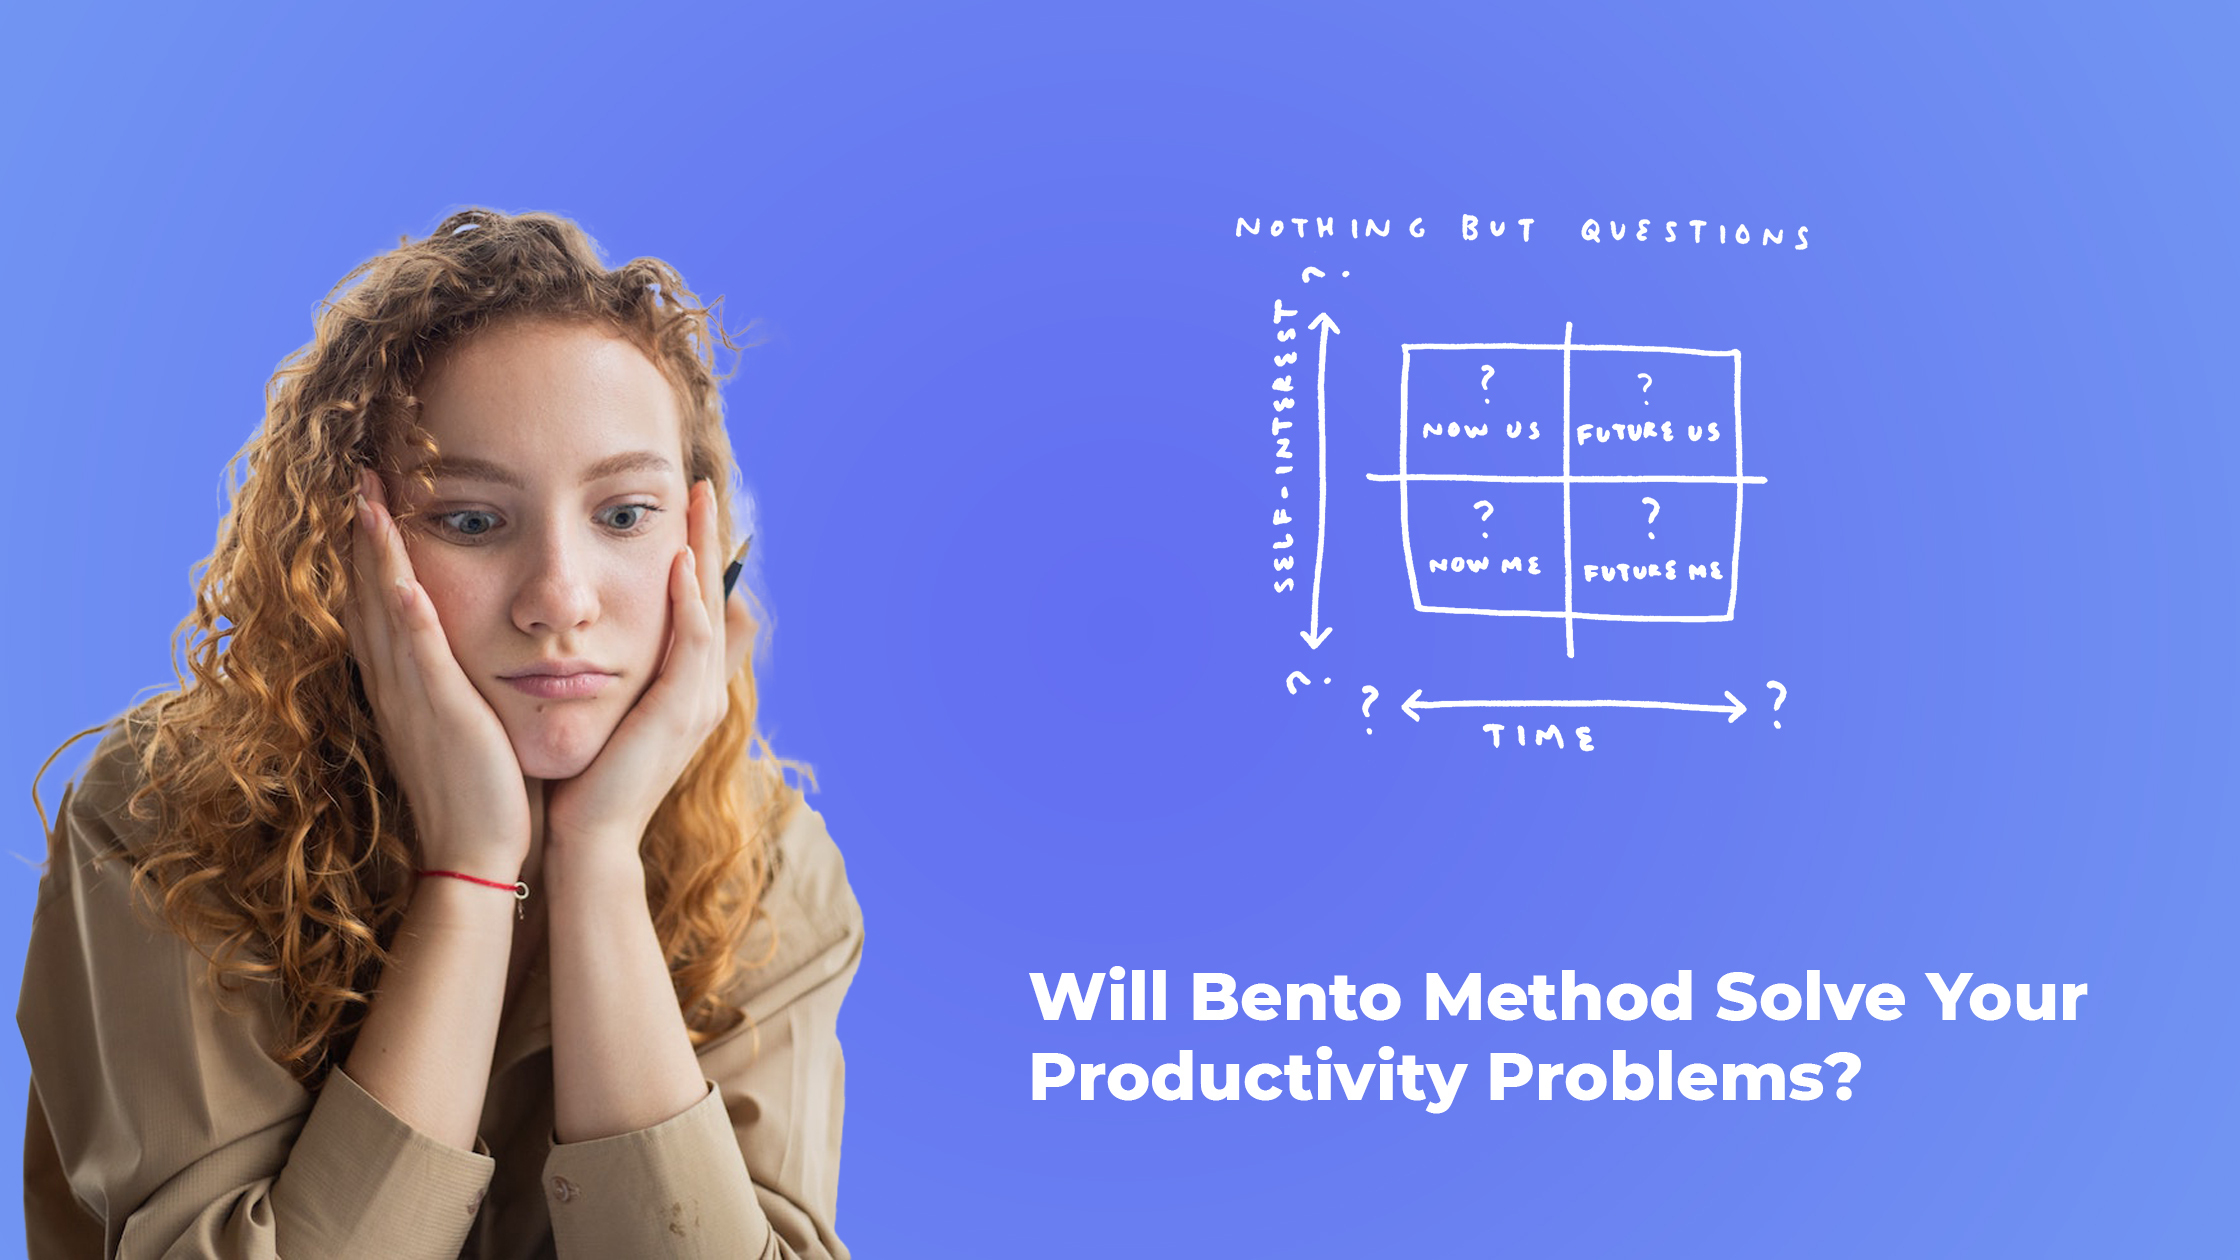 Will Bento Method Solve Your Productivity Problems?